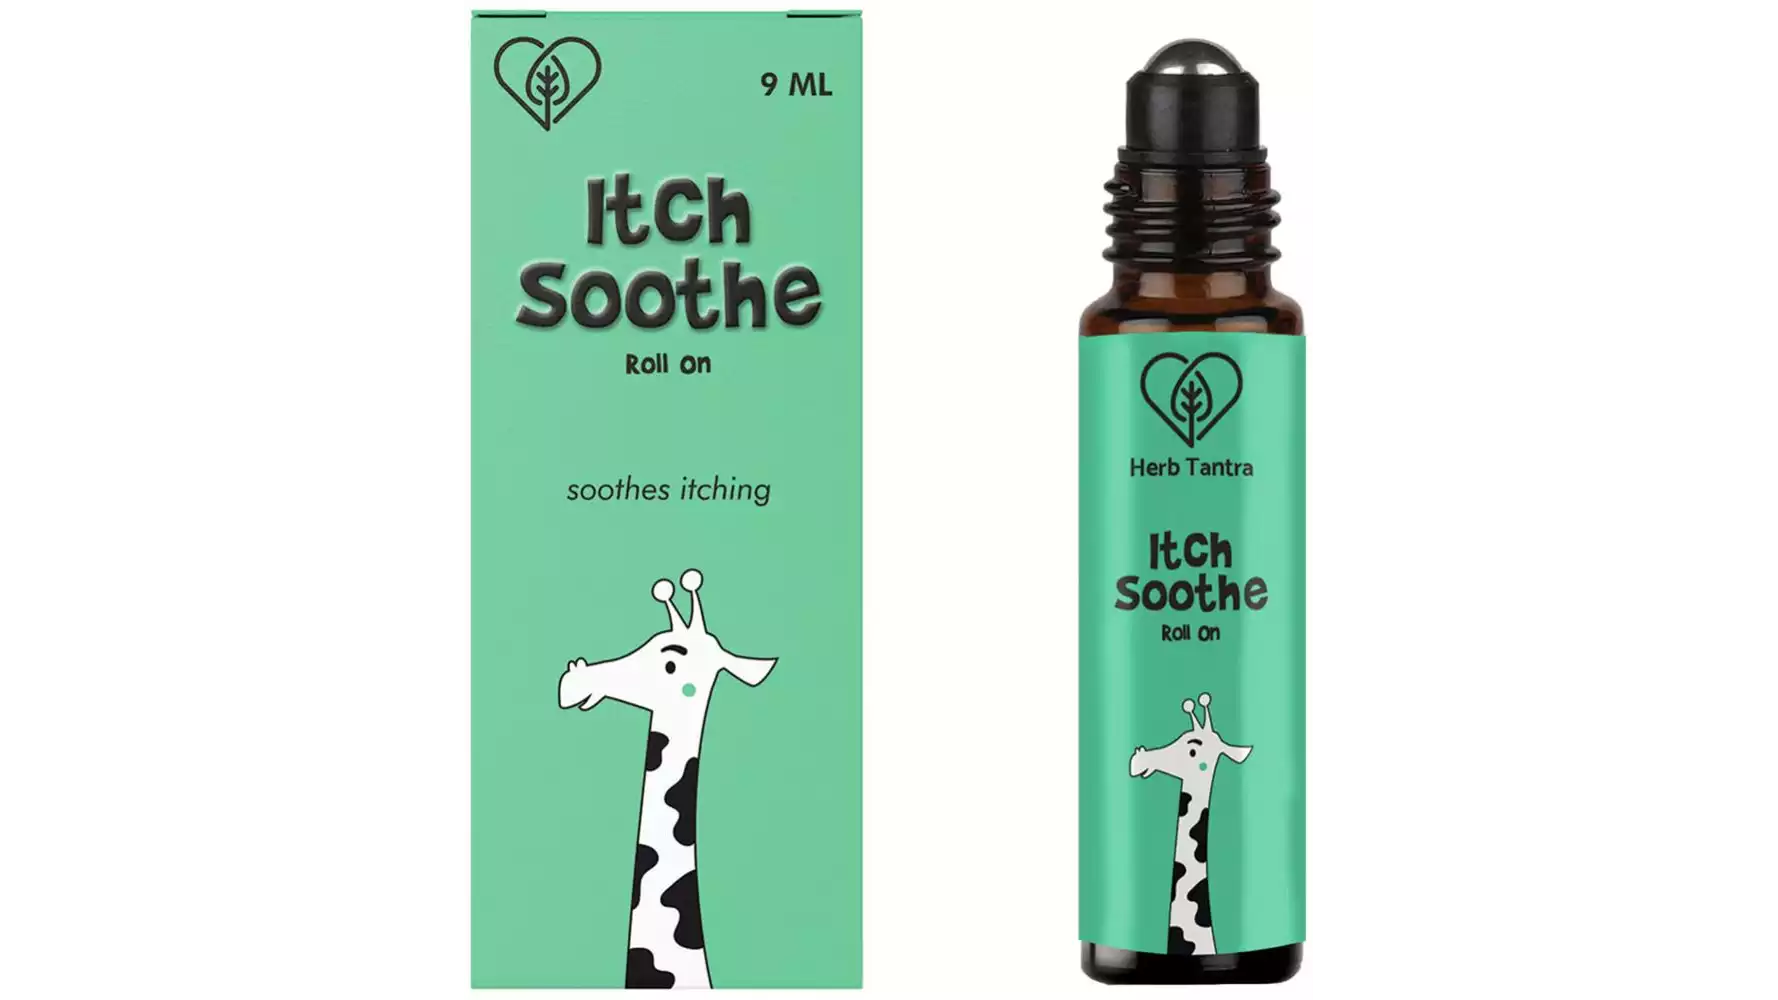 Herb Tantra Itch Soothe Kids Roll On For Itches & Bug Bites (9ml)